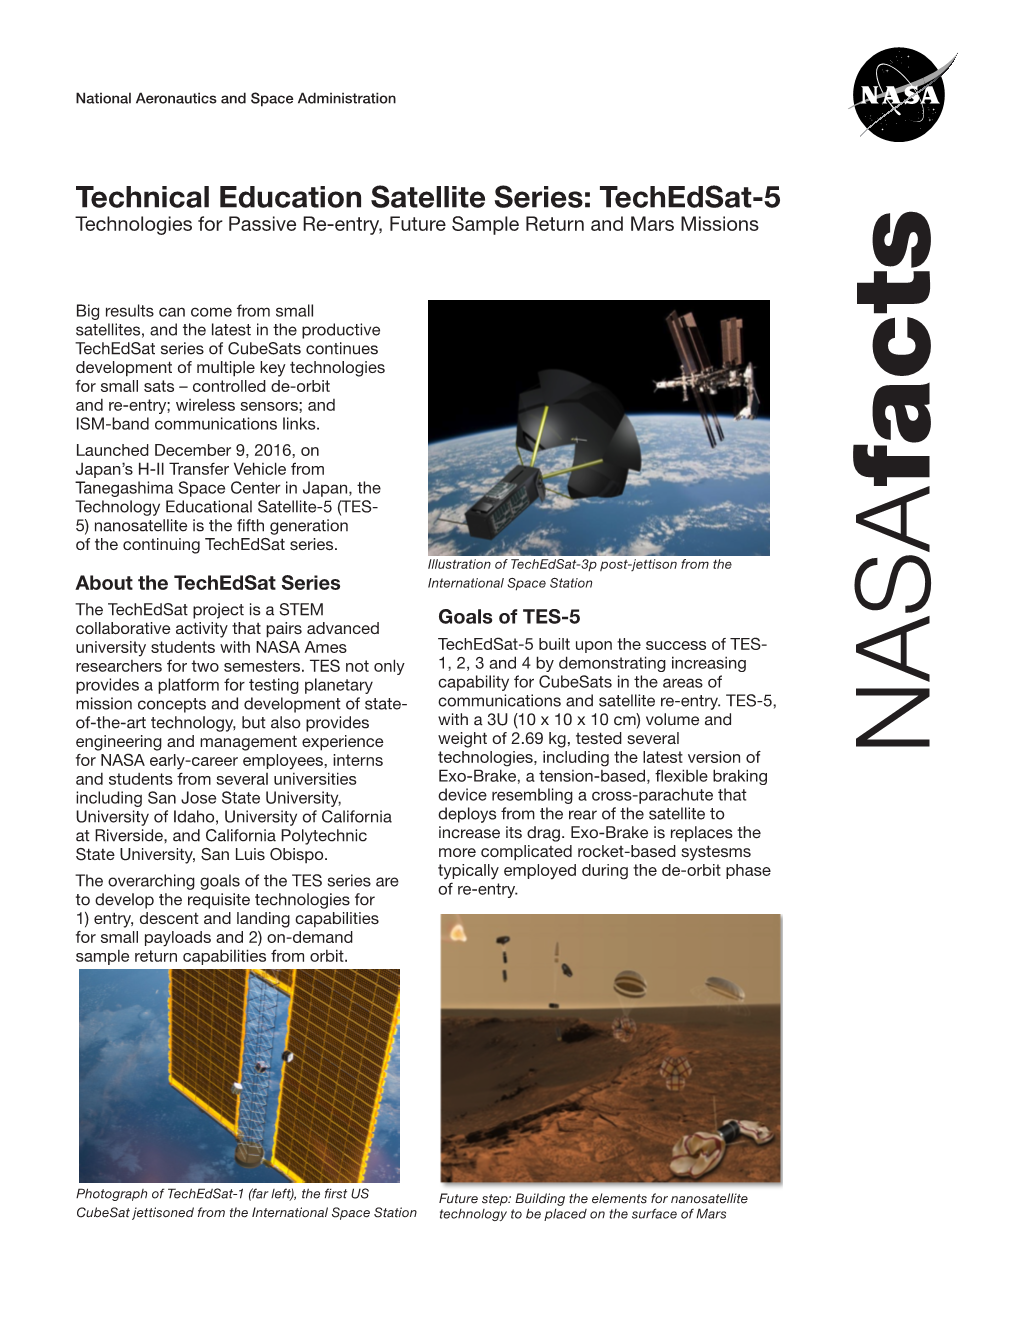 Techedsat-5 Technologies for Passive Re-Entry, Future Sample Return and Mars Missions